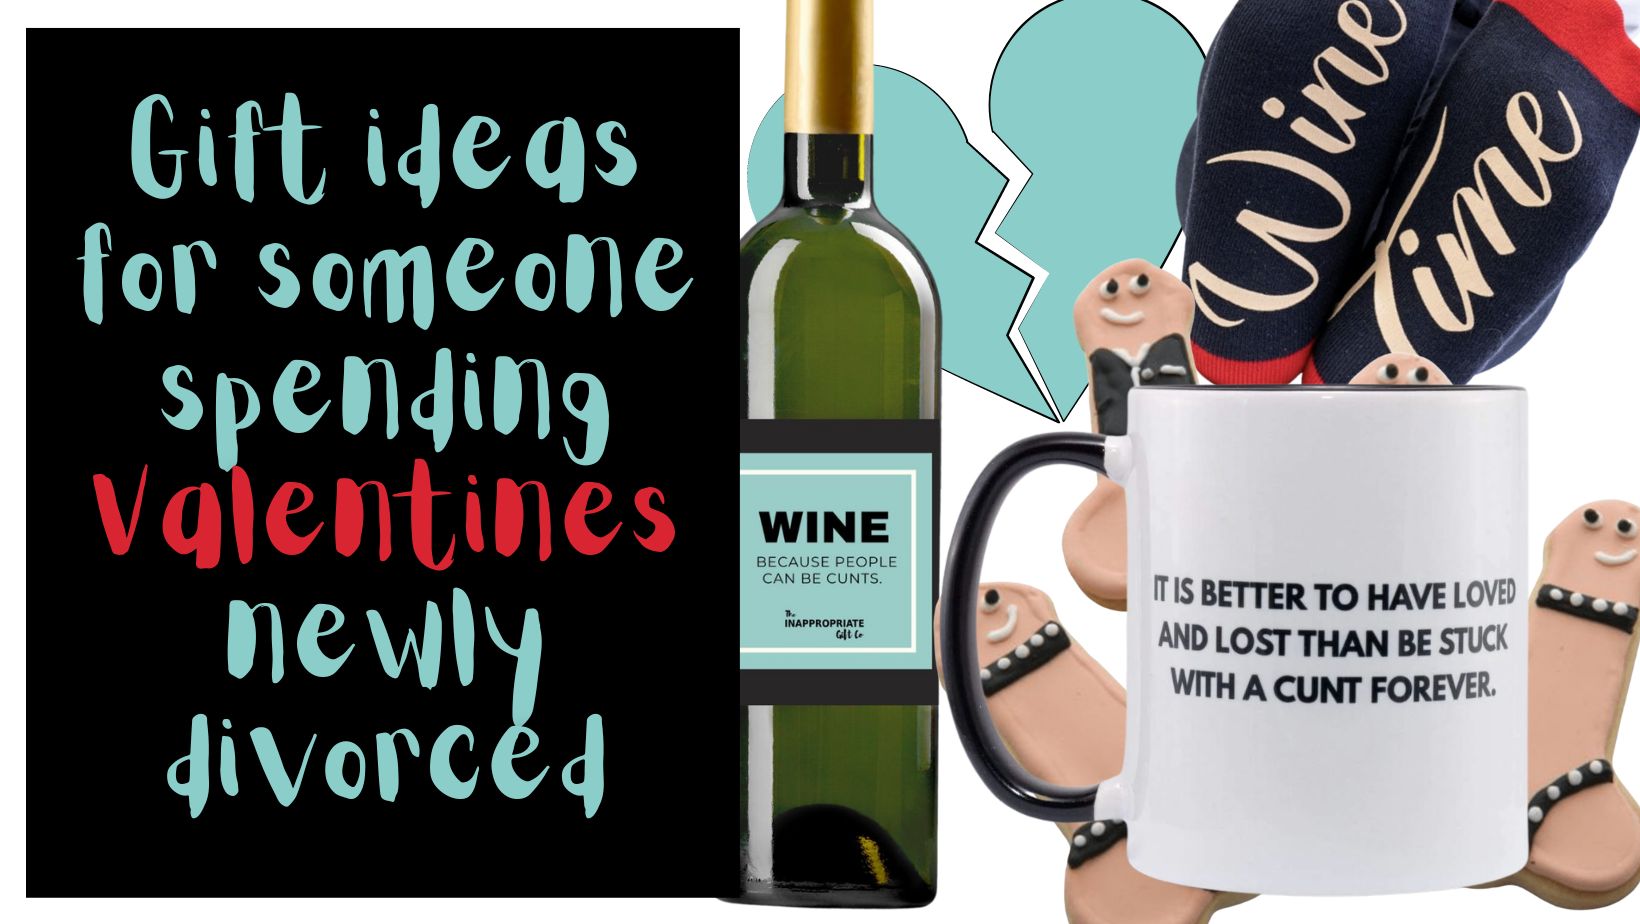 Valentines Day Gift Ideas for Those Going Through a Divorce